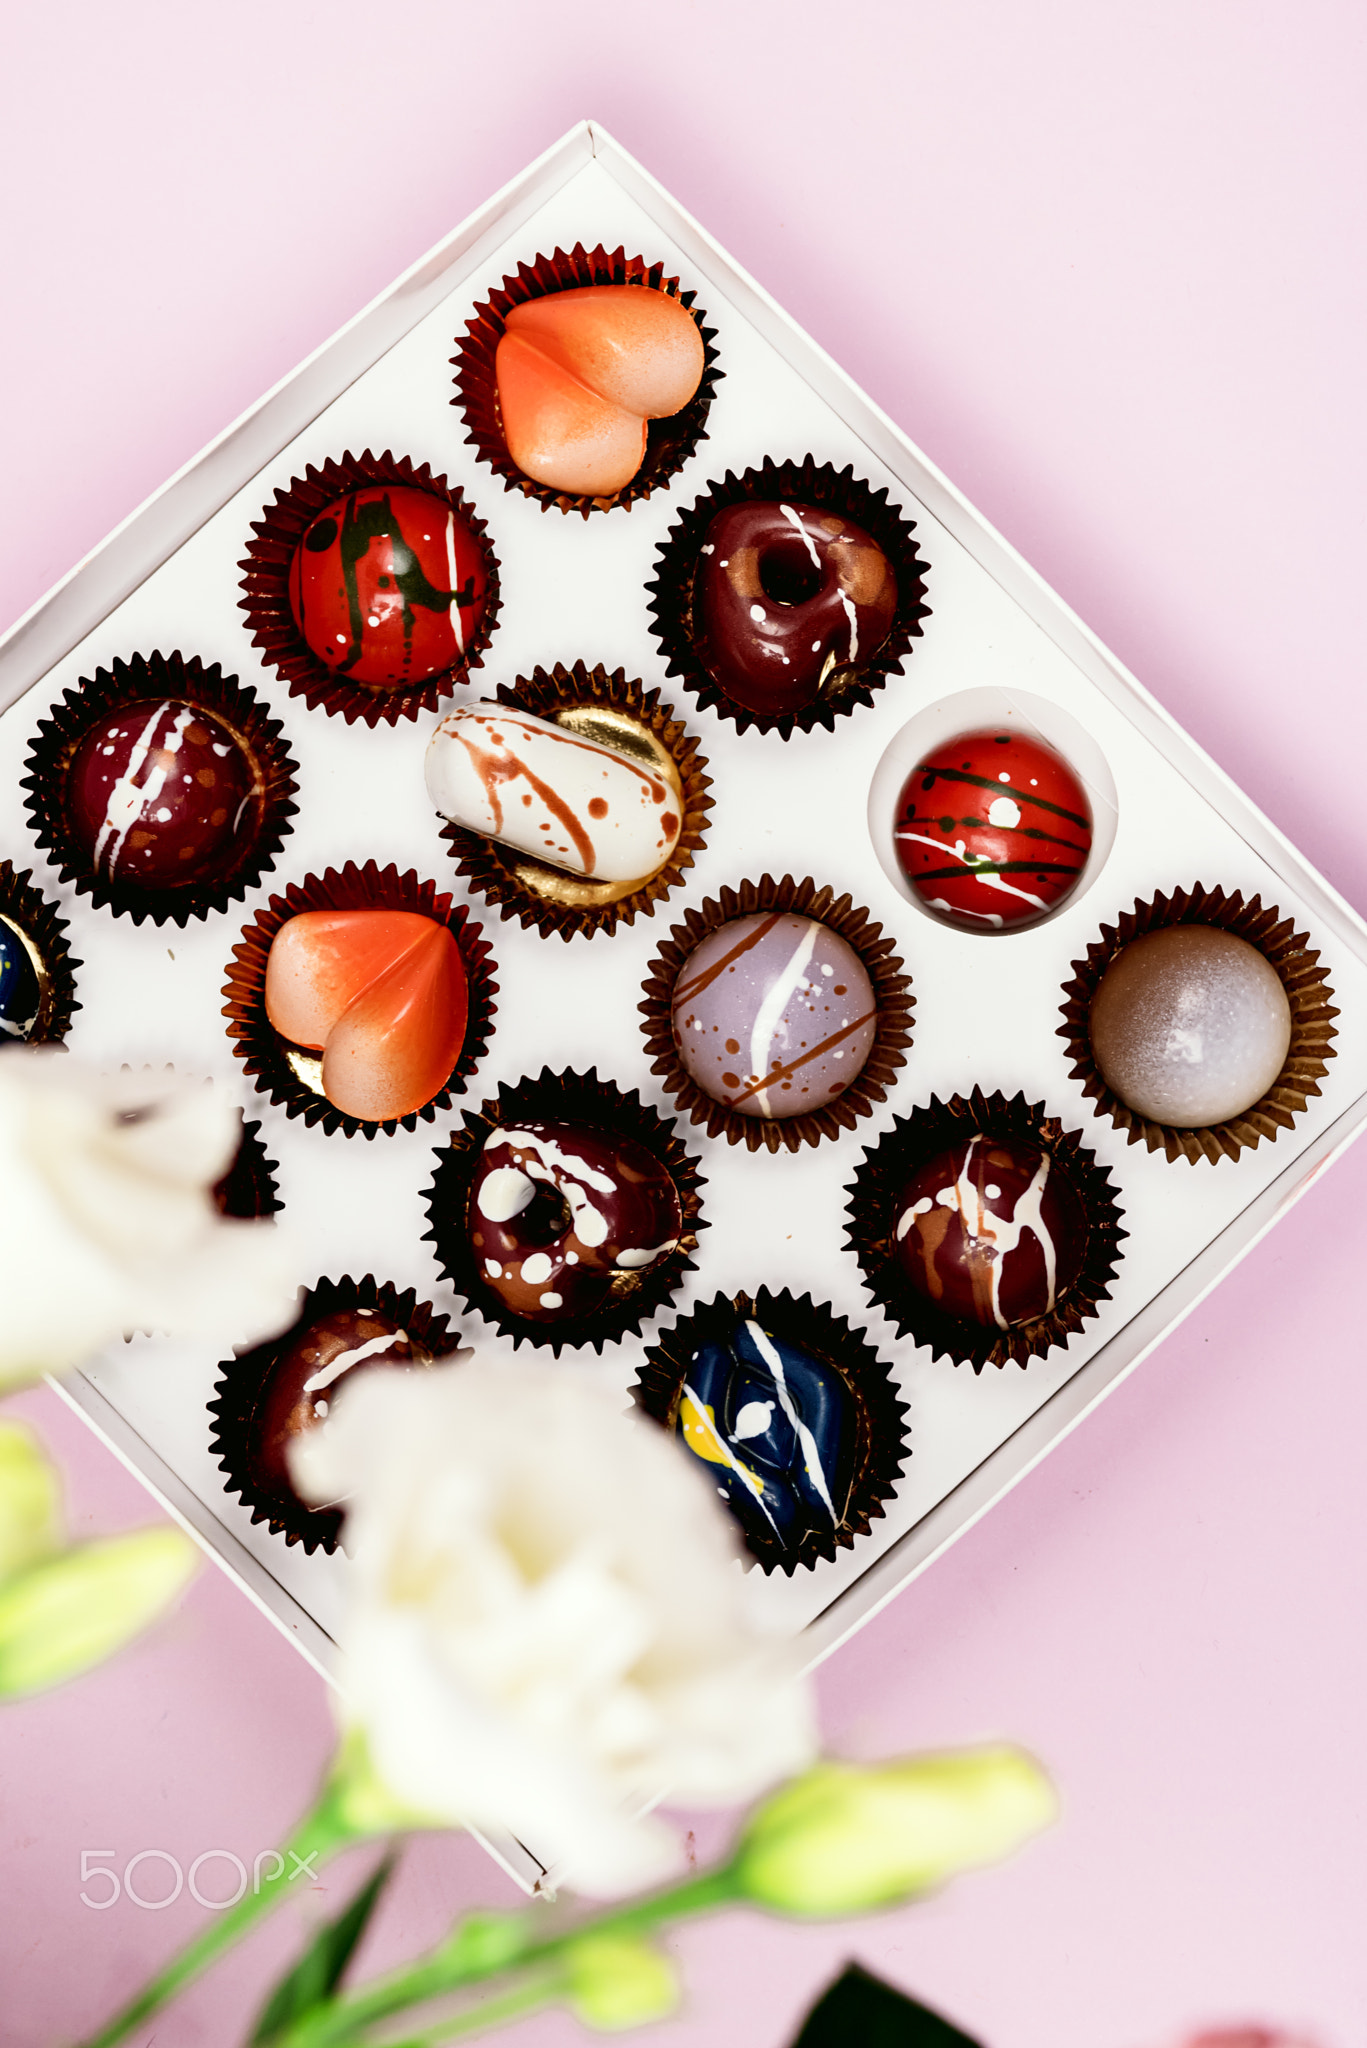 Luxury Bonbons Painted with Differents Colors in White Box